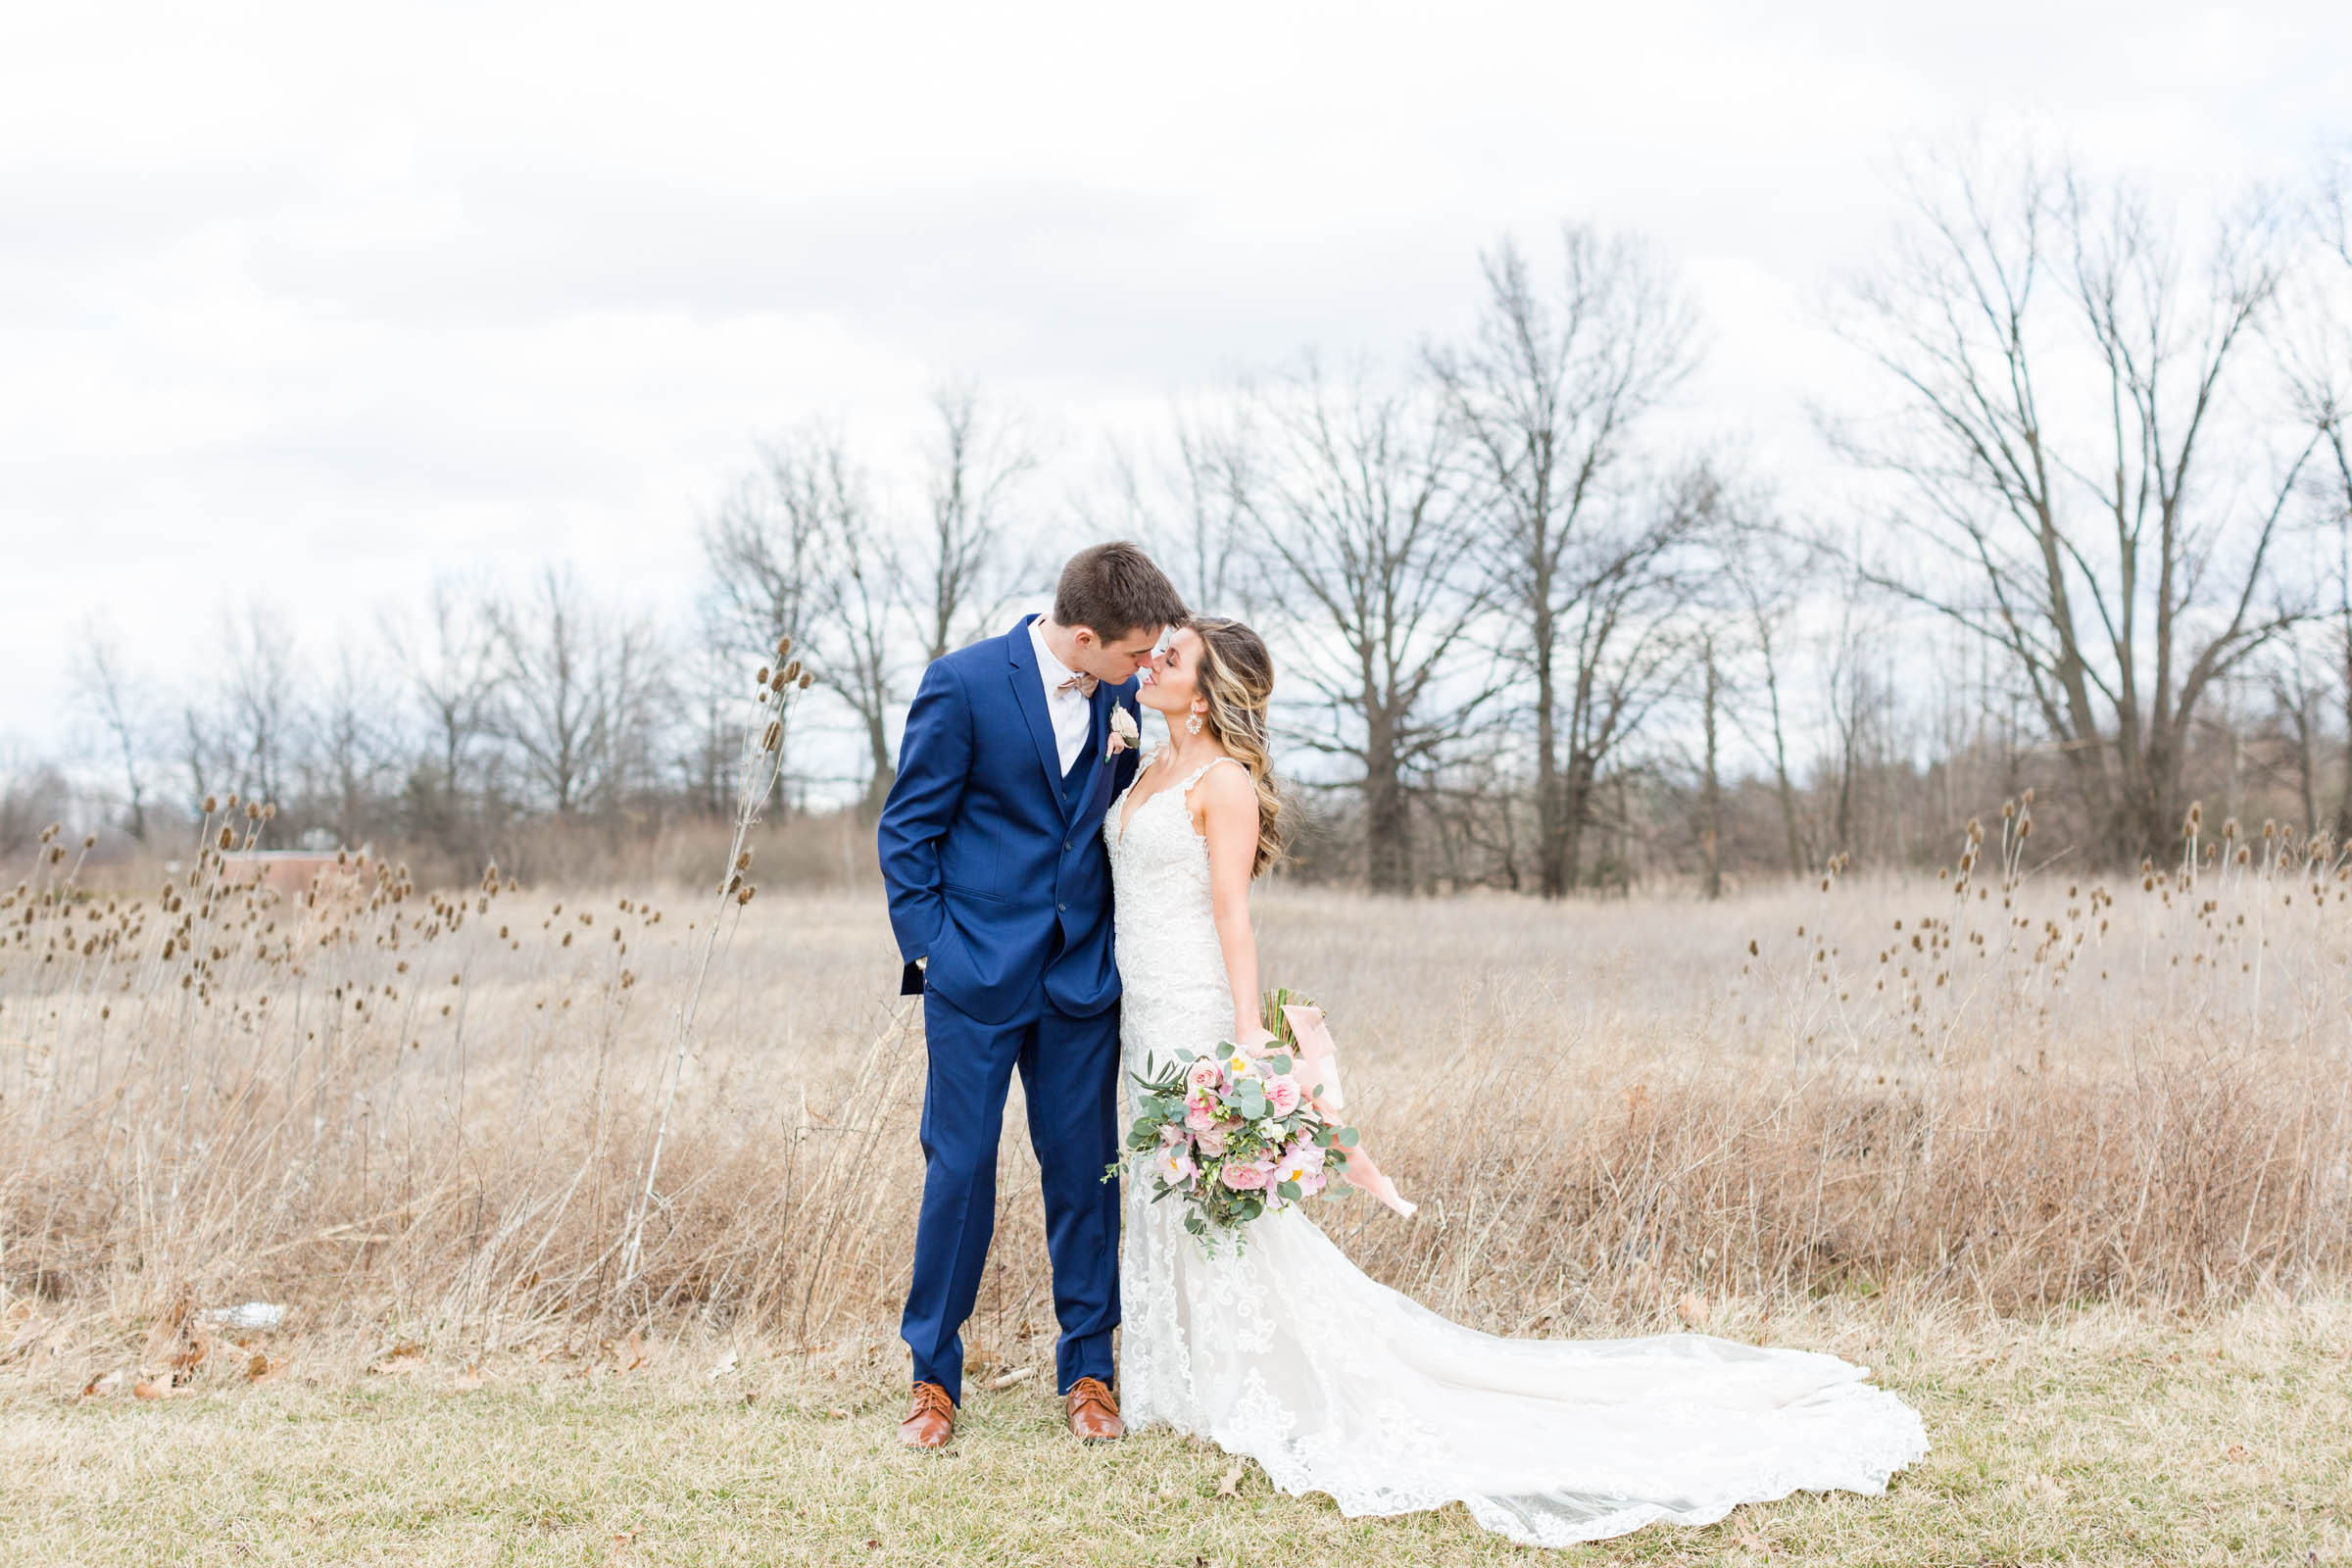 Sydney and Conner: Blush and Gold Wedding At The Estate At New Albany, Sweet Williams Photography